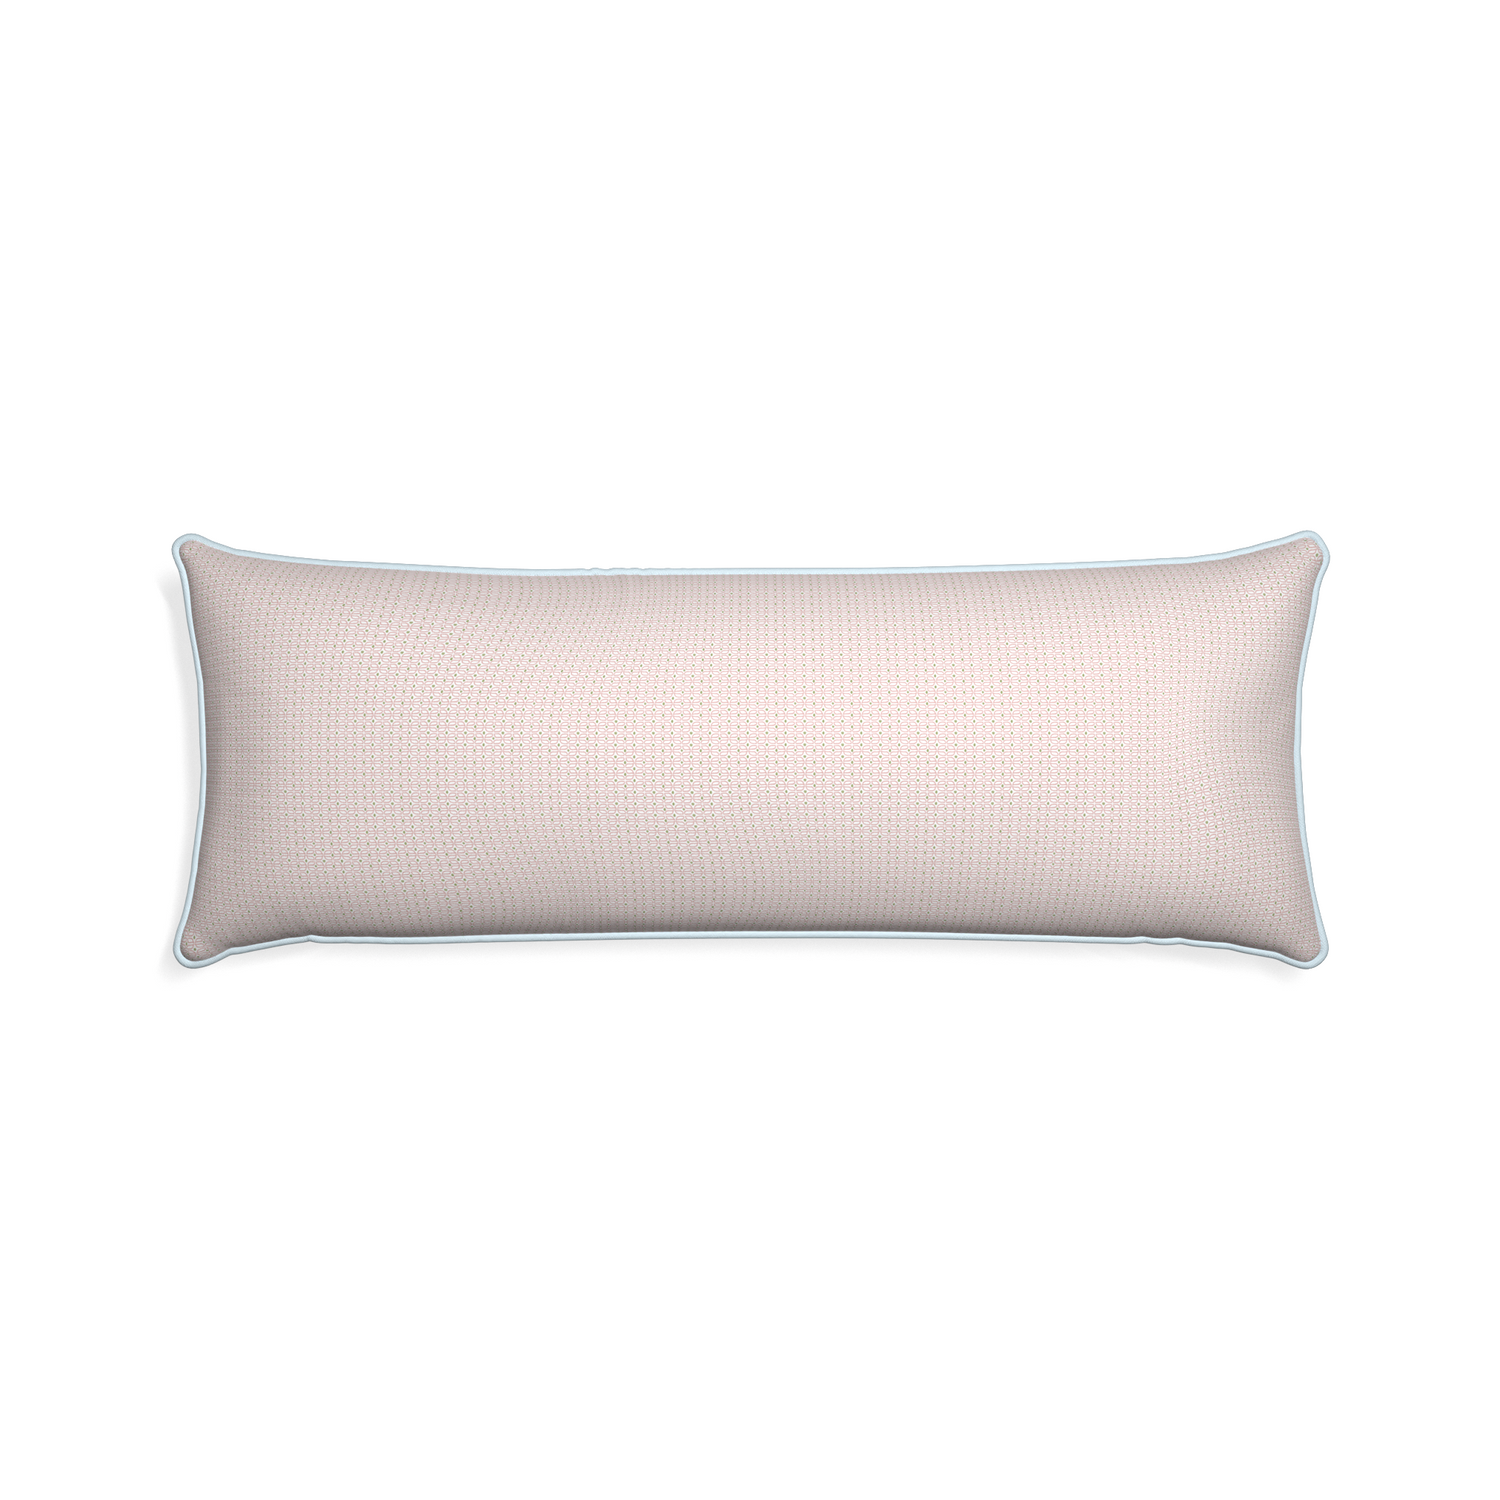 Xl-lumbar loomi pink custom pillow with powder piping on white background